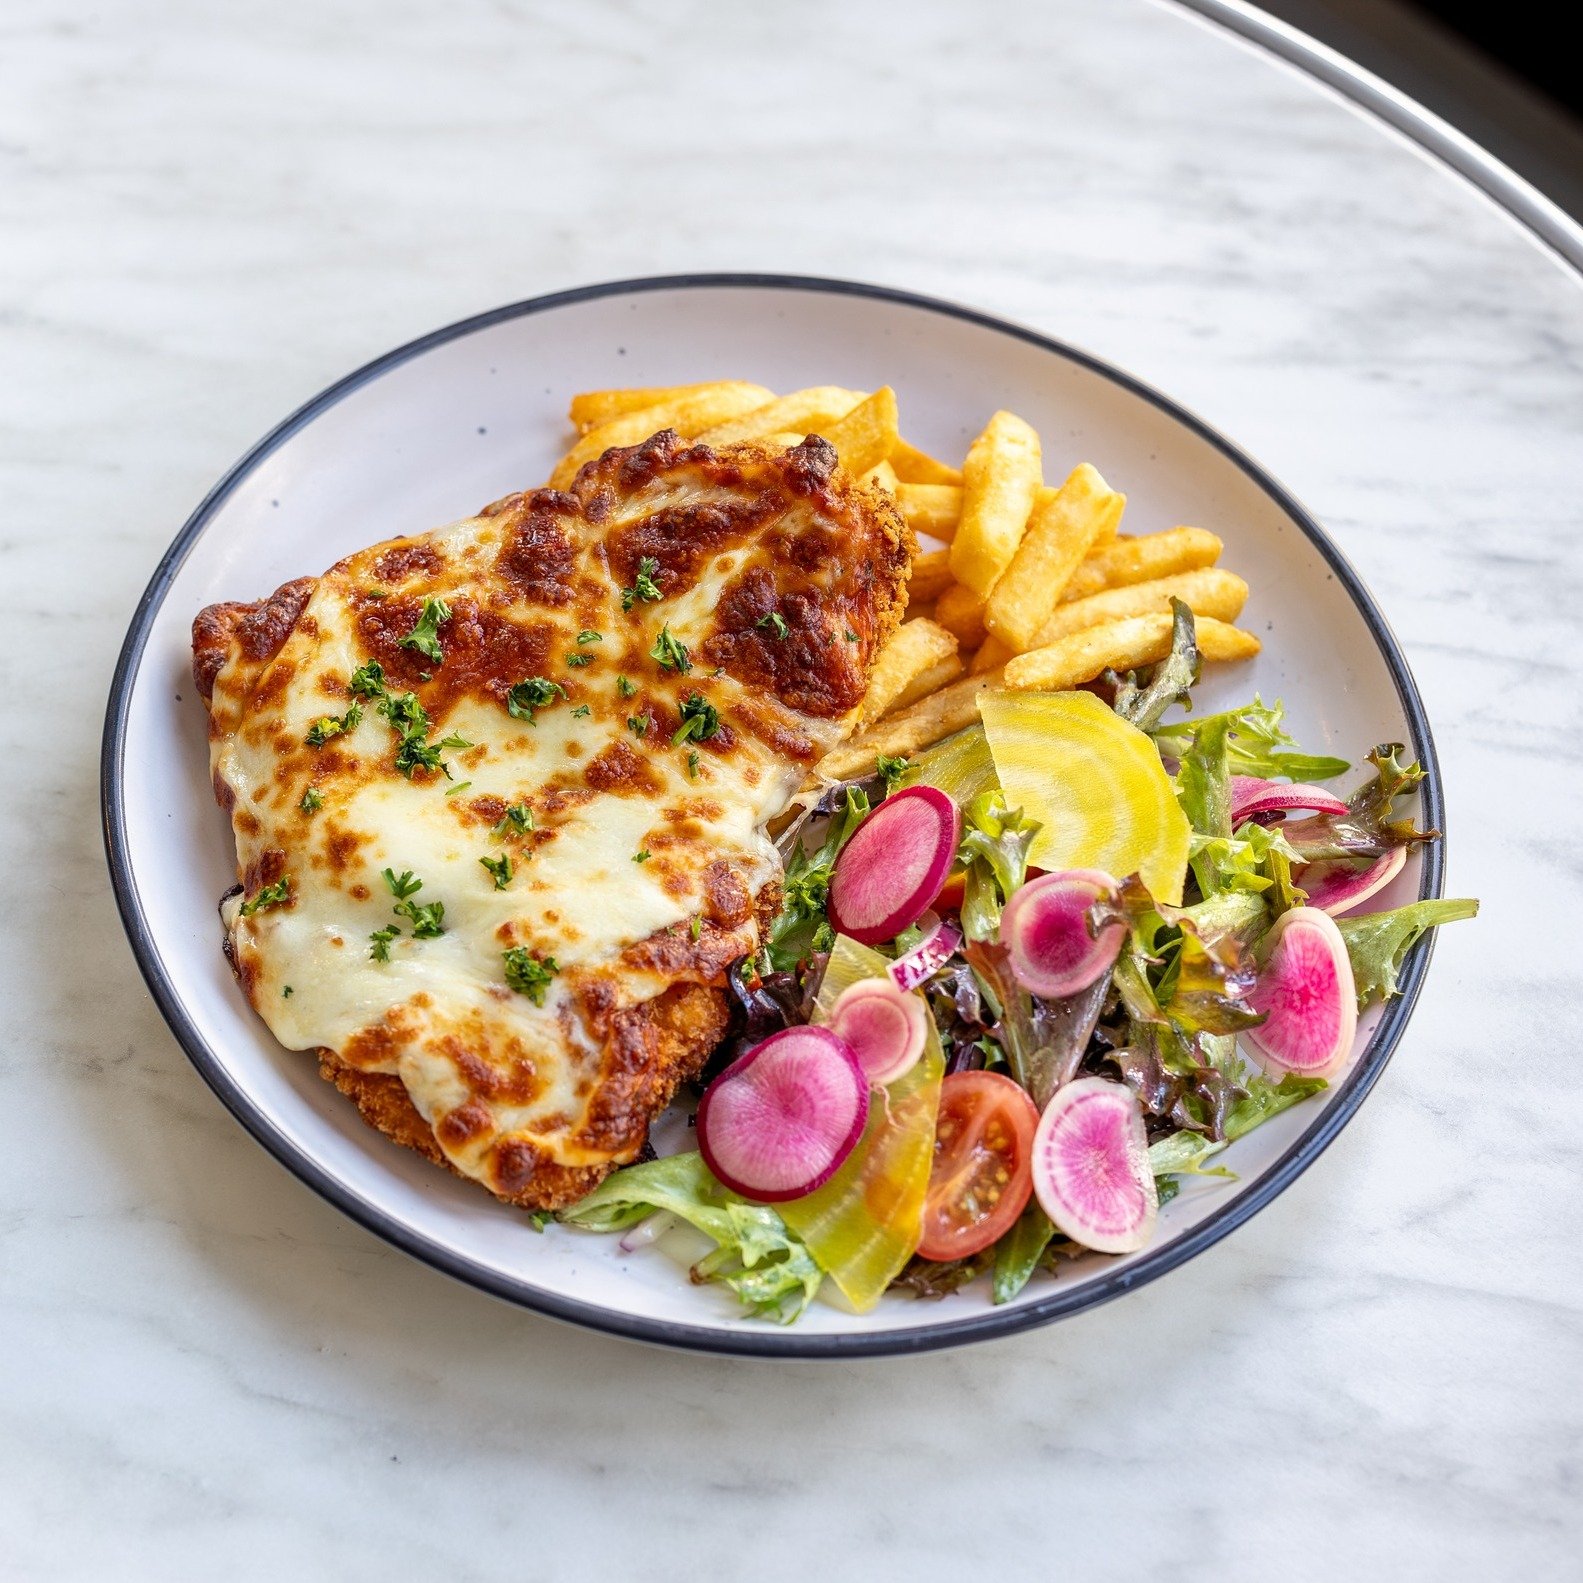 When life gives you lemons, trade them for parmi! 🍋➡🍗

Indulge in our classic chicken parmigiana served with beer battered chips and house salad for ONLY $15 every Thursday night!

Available between 5:30pm-8:30pm

Book a table with the link in our 